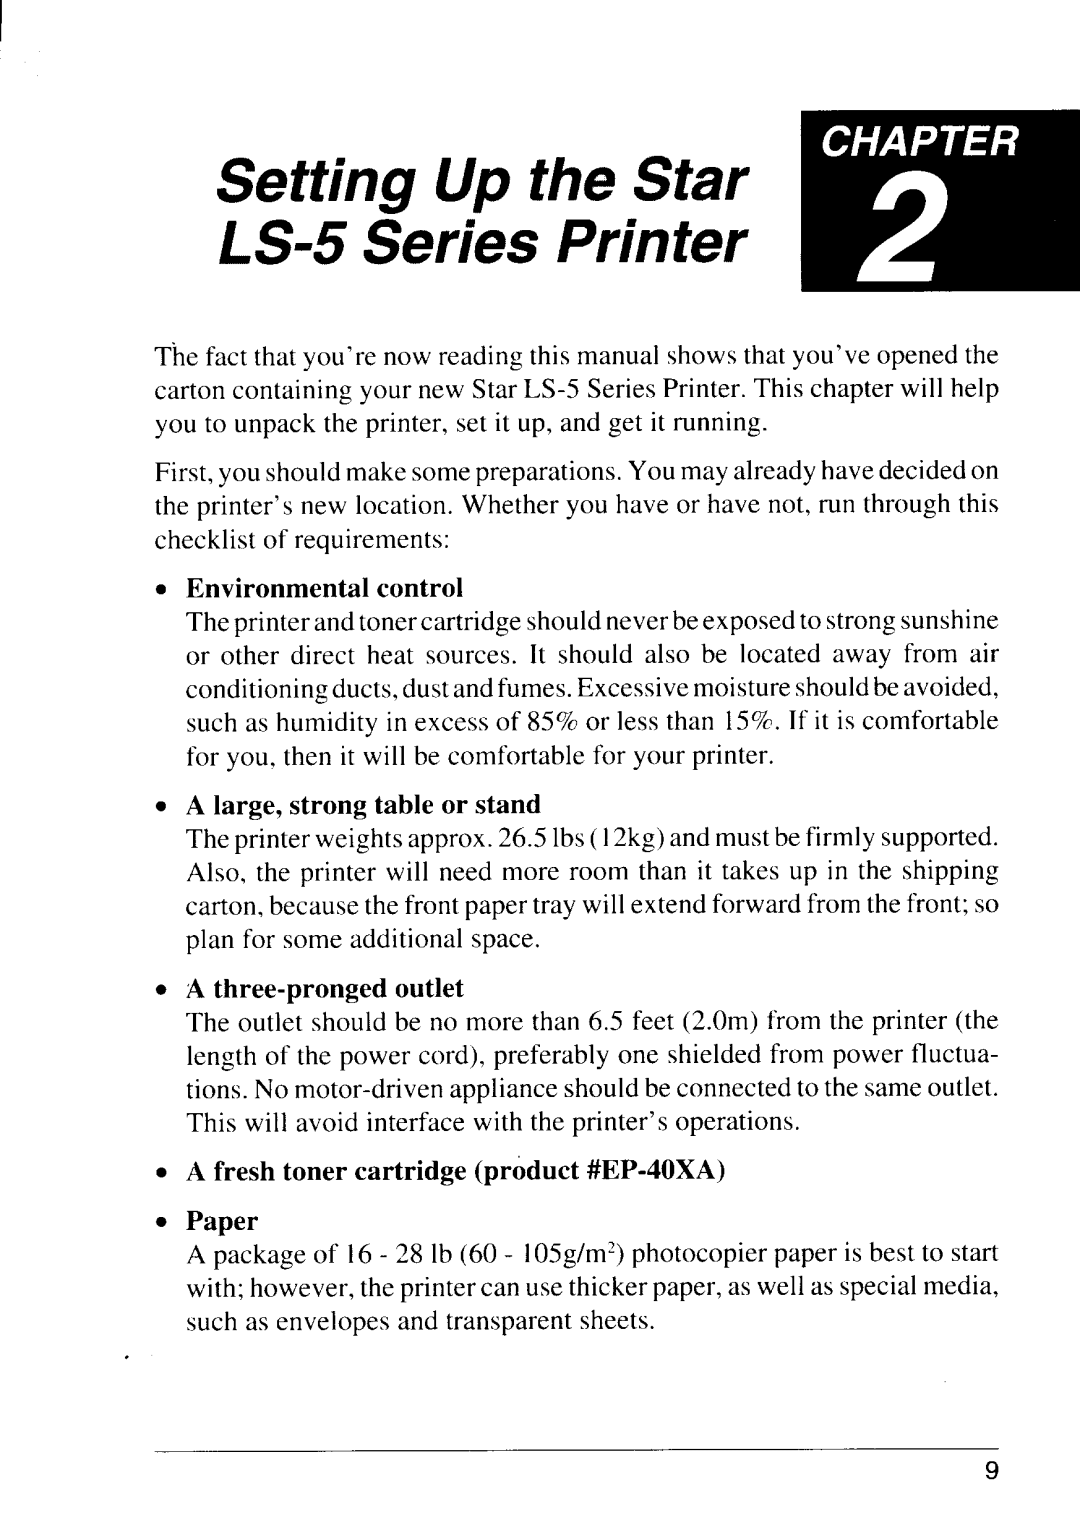 Star Micronics LS-5 TT Setting Up the Star E!i‘” “ LS-5 Series Printer, Environmental control, A three-pronged outlet 